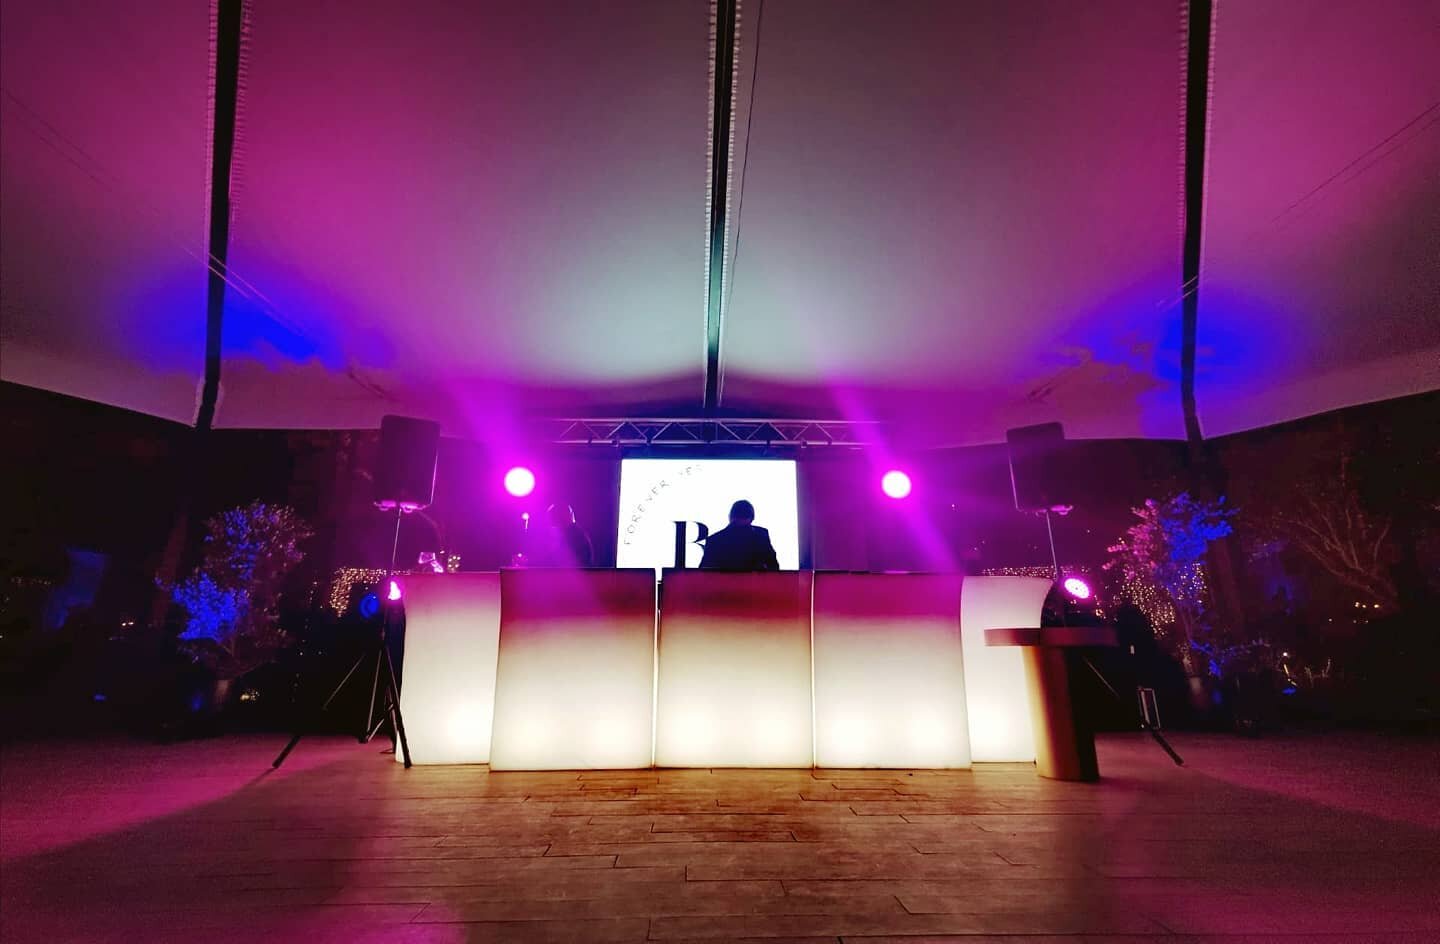 B&amp;F Wedding @ CUP Porto

- Wedding Planning + Decor + Assistance by&nbsp;@crachaweddingagency
- Video &amp; Photo Report by&nbsp;@overallstudio
- Live Band by&nbsp;@coolactiveband.livemusic
- Catering by @palace.catering

#portugalwedding&nbsp;#w